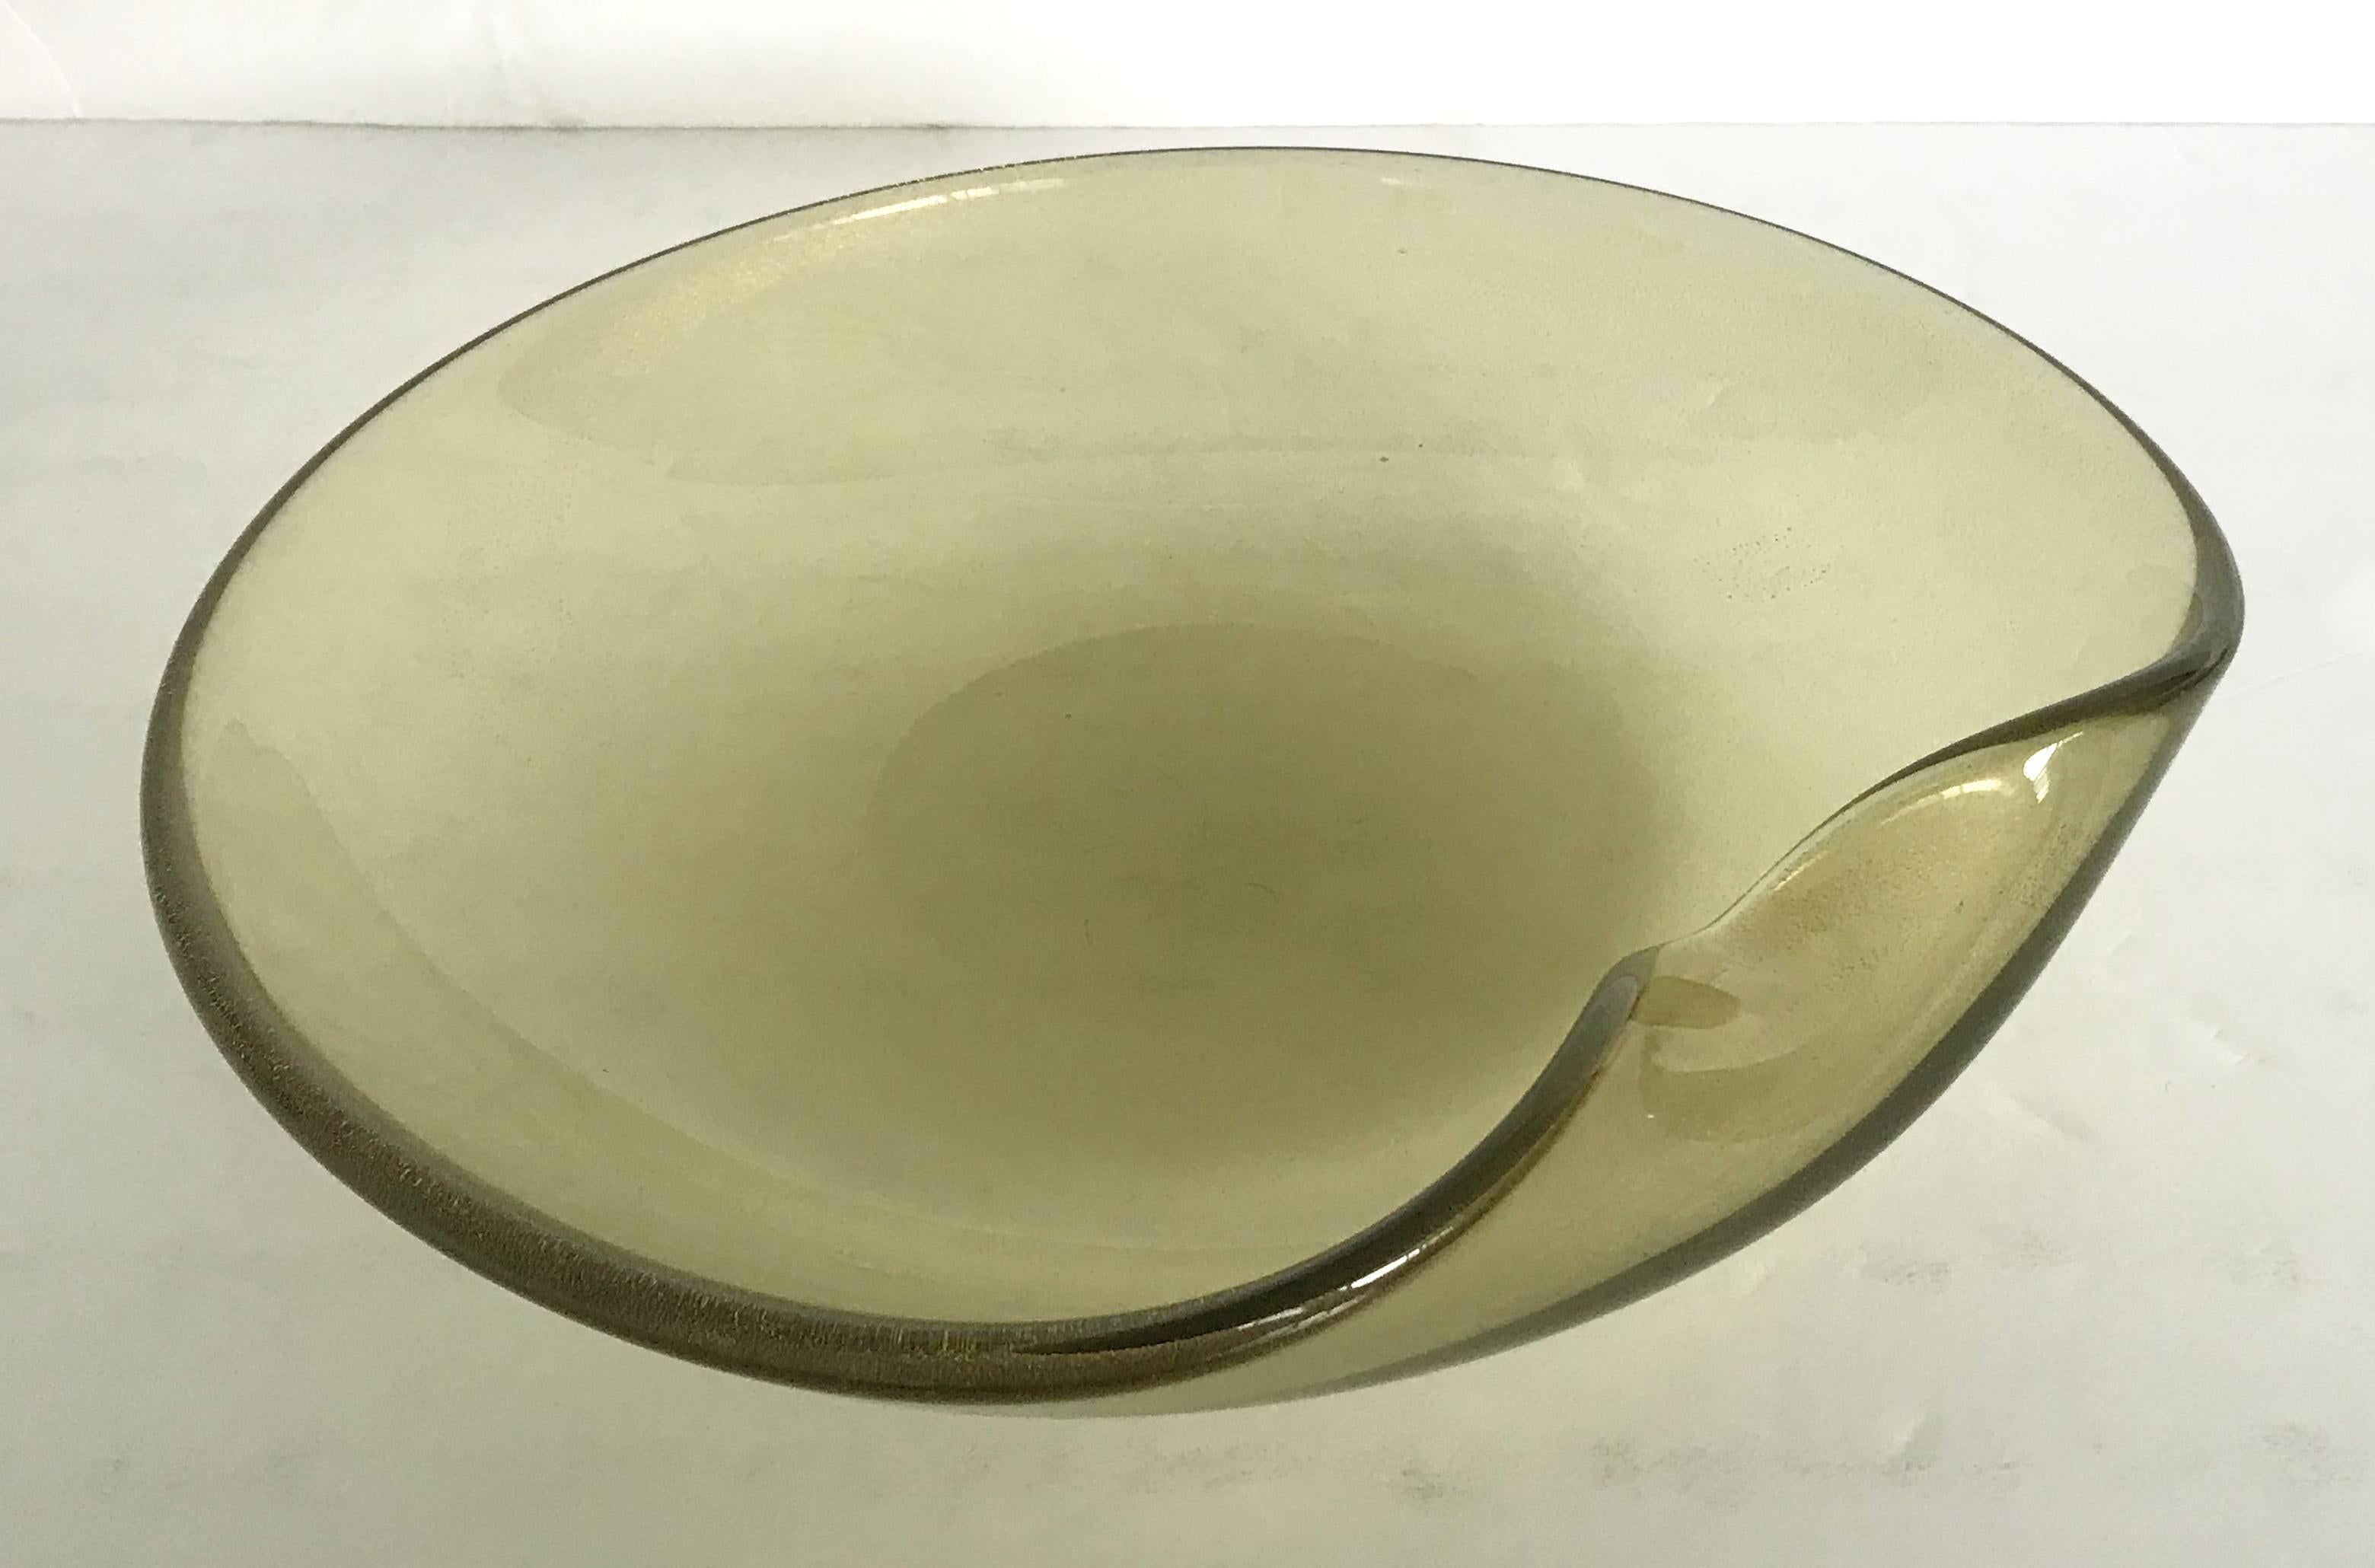 Vintage smoky Murano glass tray or centerpiece infused with gold flecks / Made in Italy, circa 1960s 
Measures: width 12 inches, depth 10 inches, height 2 inches 
1 in stock in Los Angeles
Order reference #: FABIOLTD G193
This piece makes for a